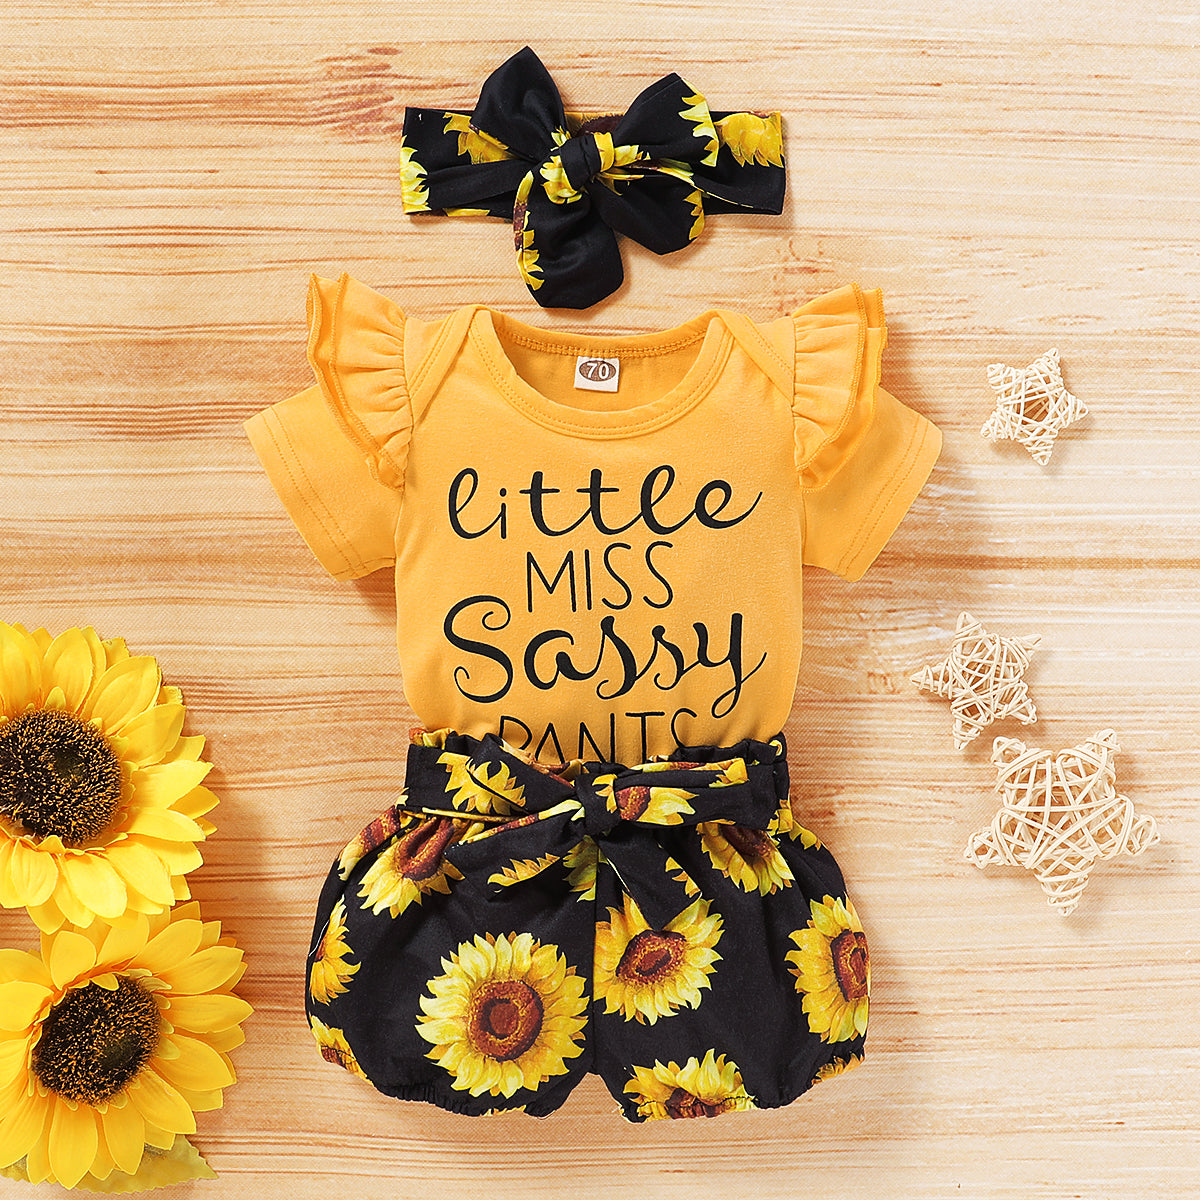 Girl's Cartoon Sunflower Pattern 2pcs, Long Sleeve Top & Flared Pants Set,  LITTLE MISS SASSY PANTS Print Ruffle Decor Casual Outfits, Kids Clothes For